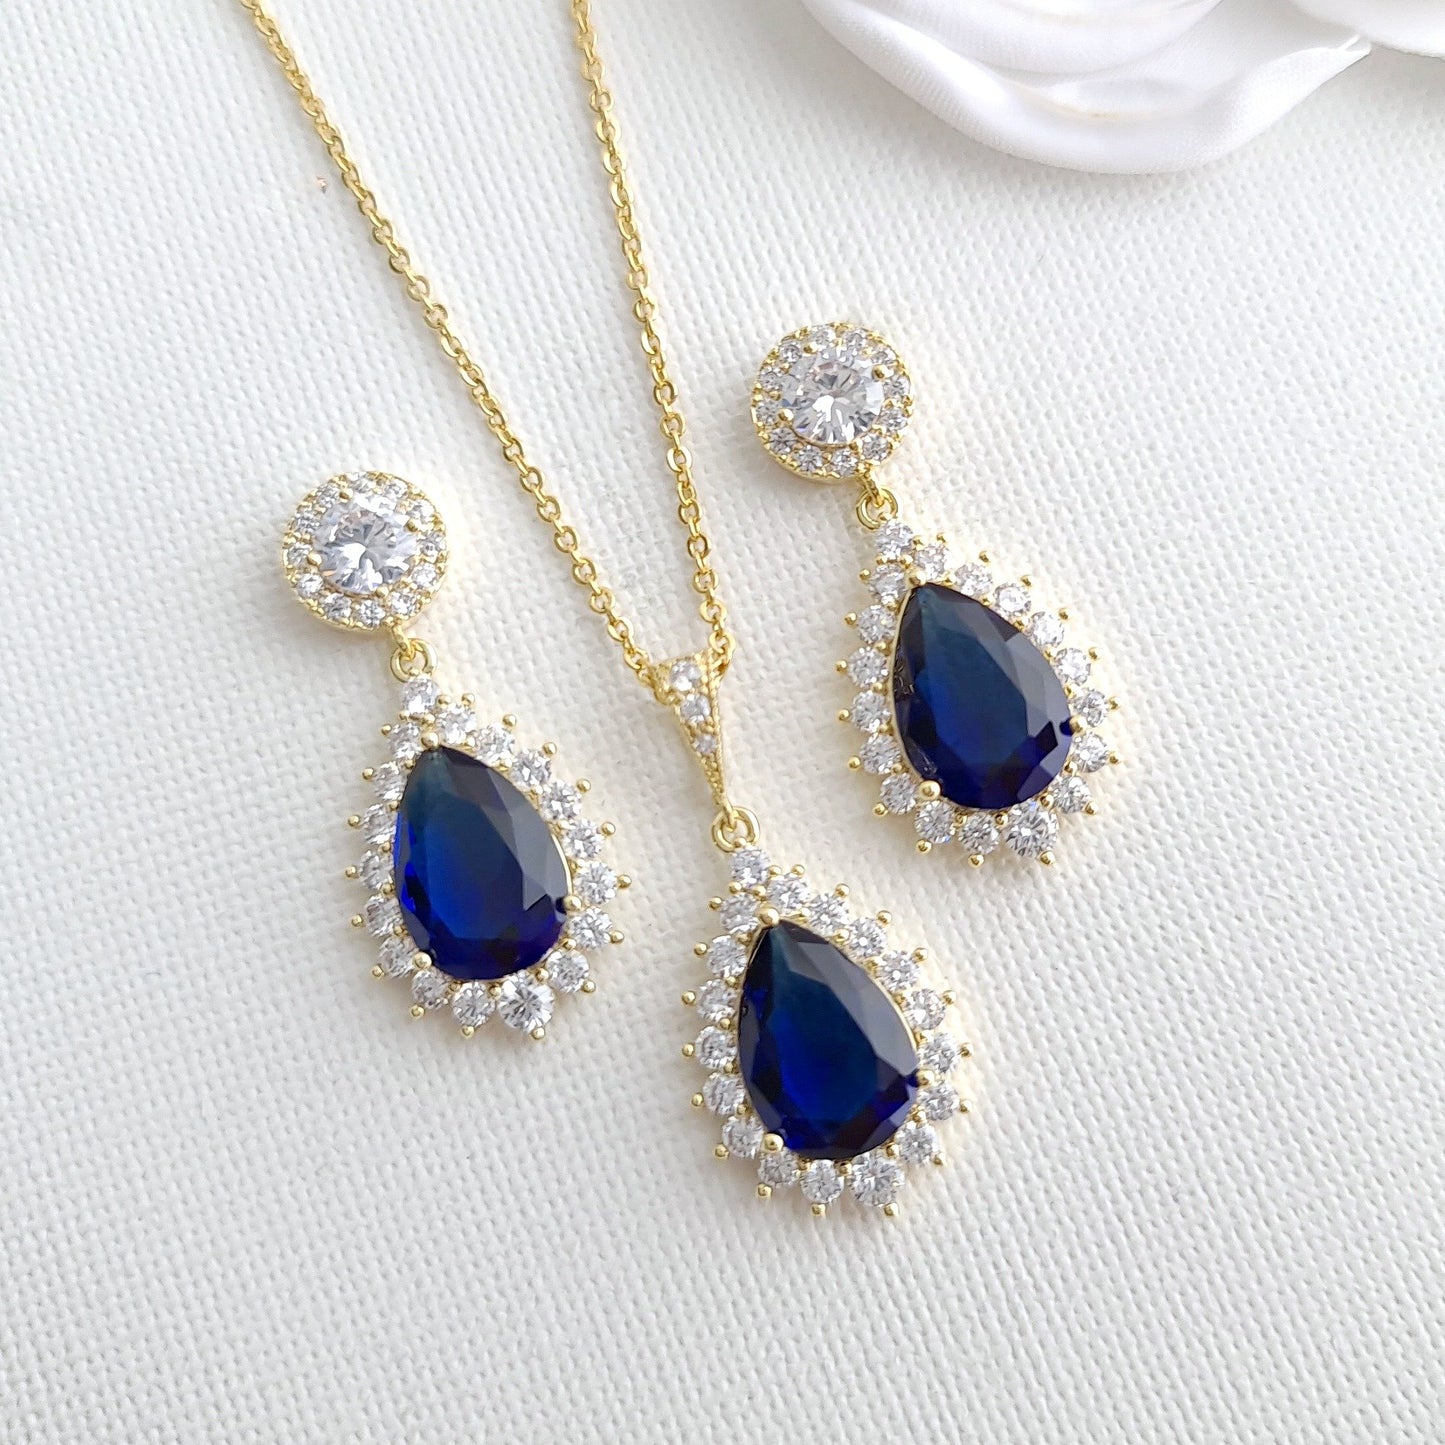 Blue Earrings Necklace Set in Gold-Aoi